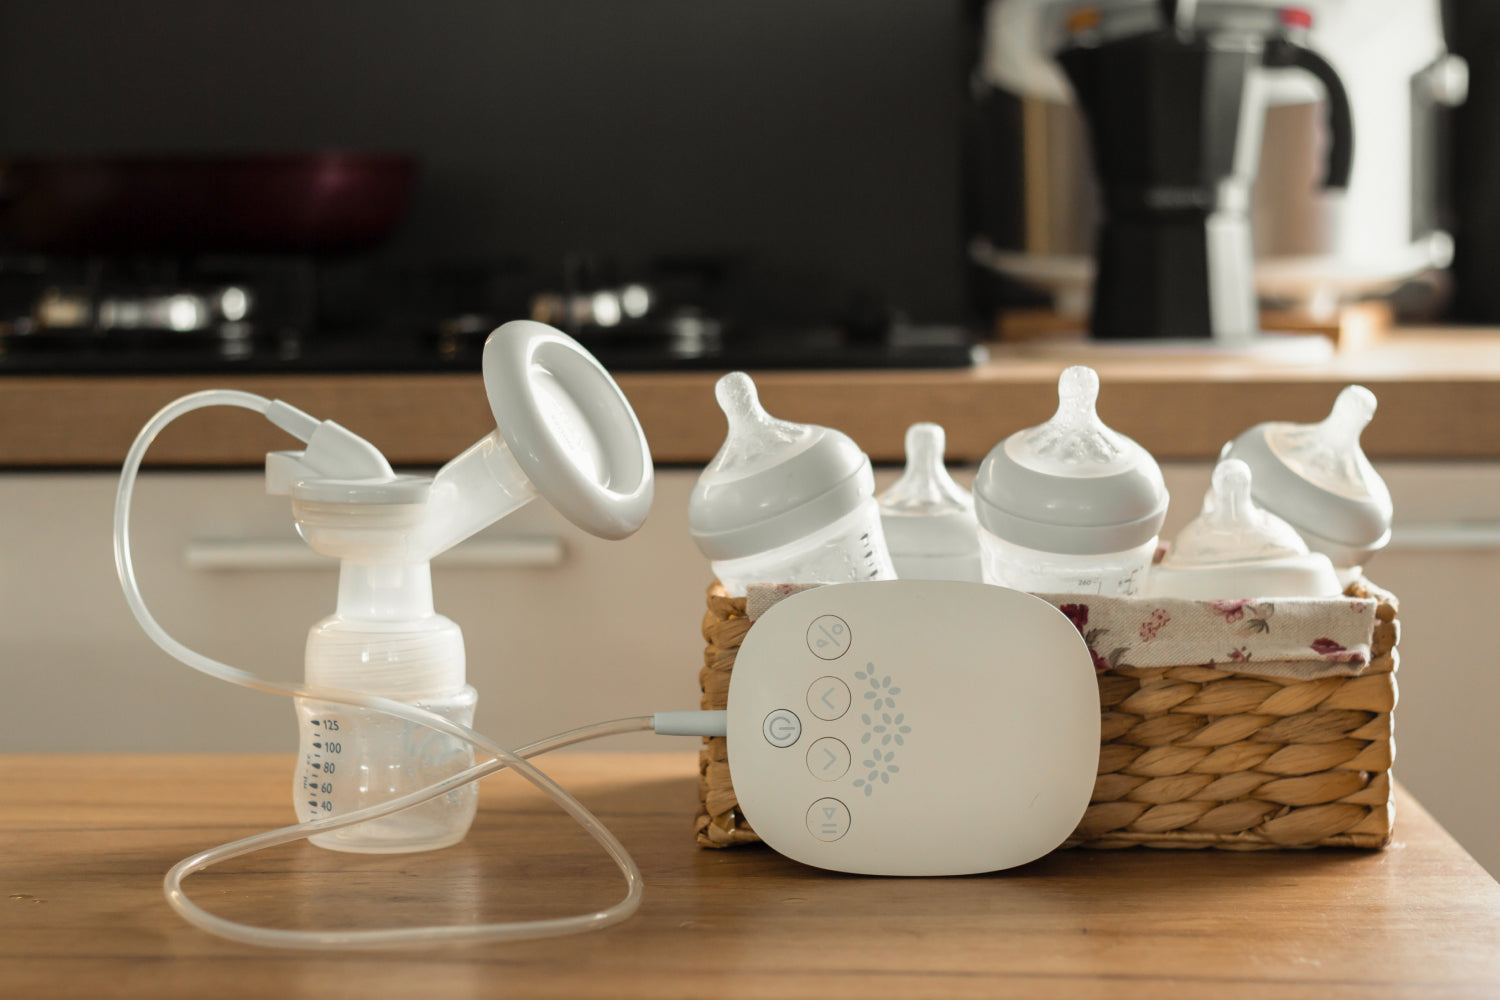 How To Get an Insurance-Covered Breast Pump Step-By-Step